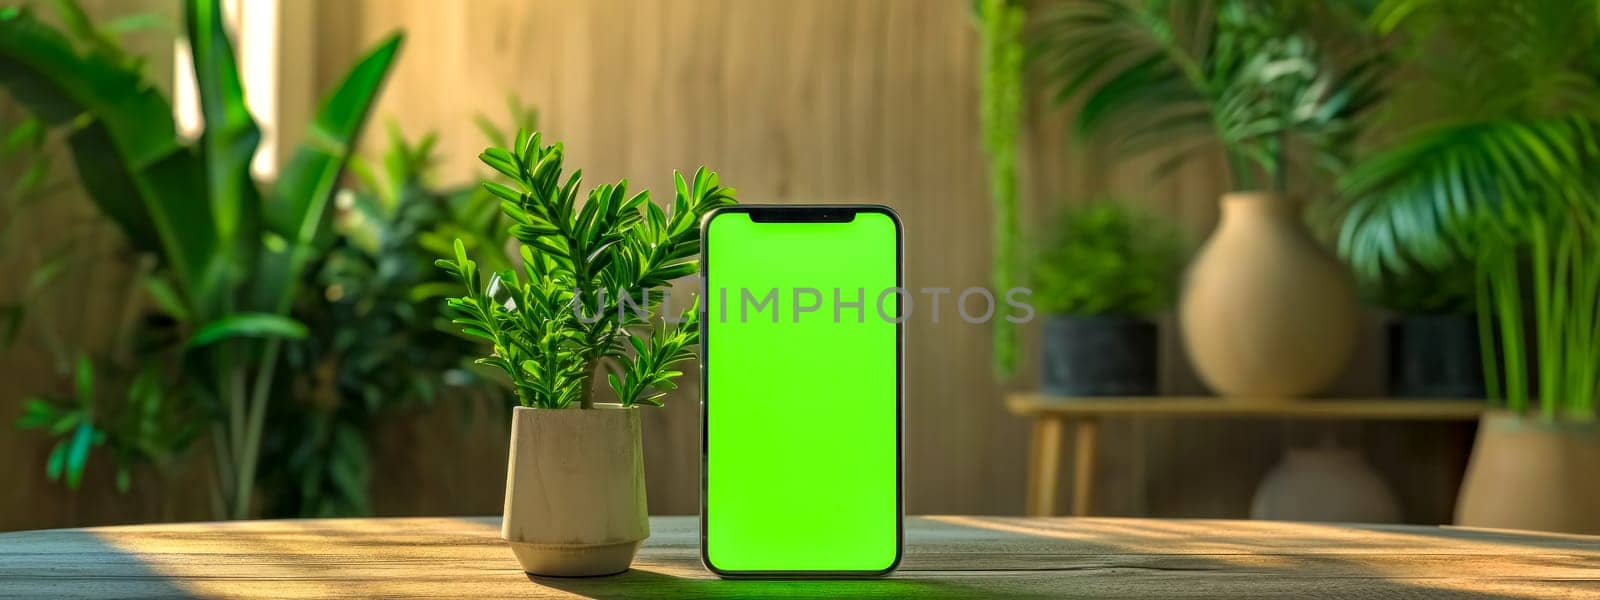 smartphone with a green screen placed on a wooden table amidst an indoor plant setting, suggesting a theme of technology harmoniously integrated with nature, banner